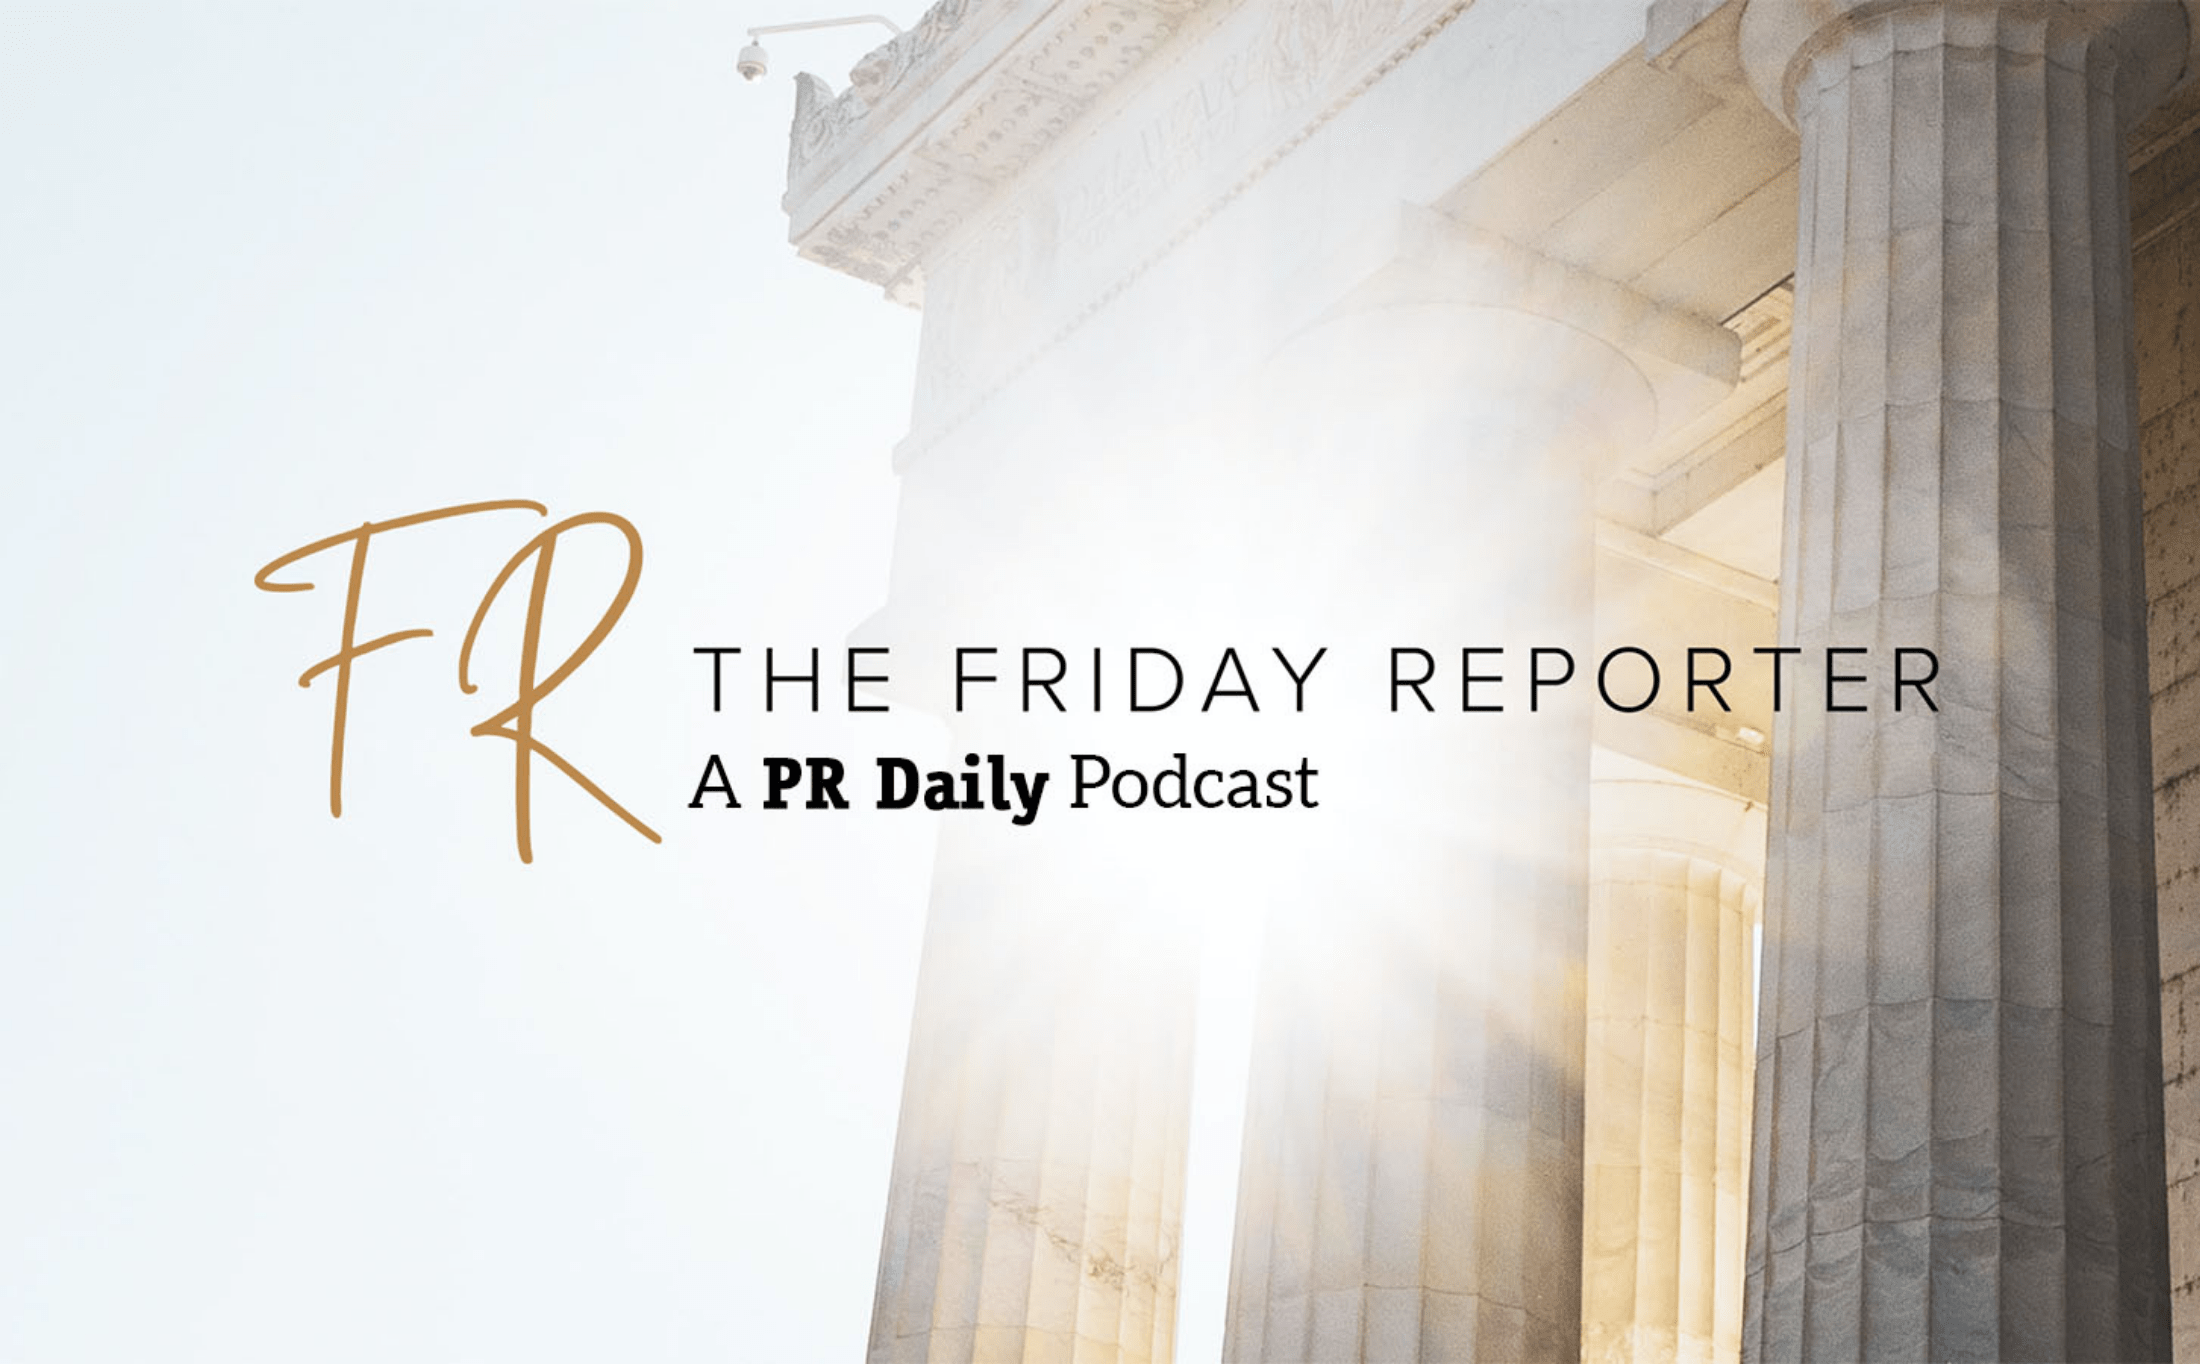 The Friday Reporter